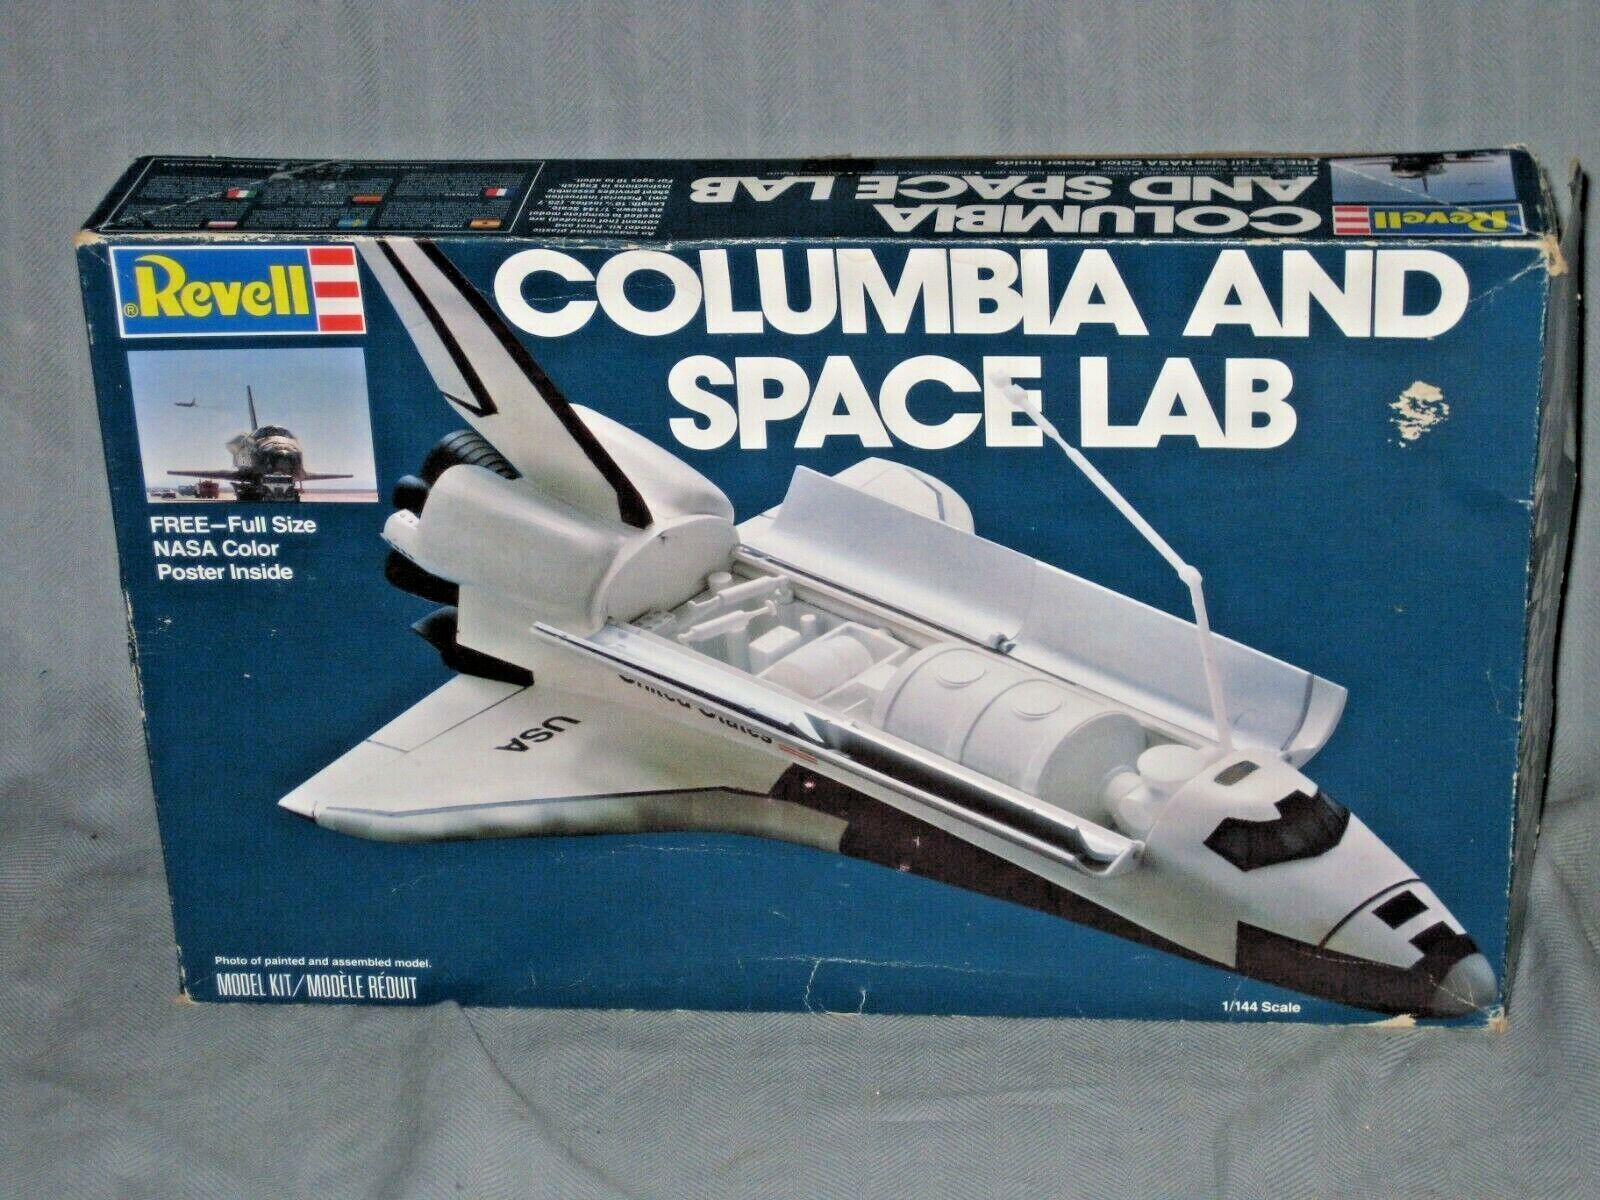 Vintage Revell NASA Space Shuttle Columbia Model Kit & Collectible Poster in Box